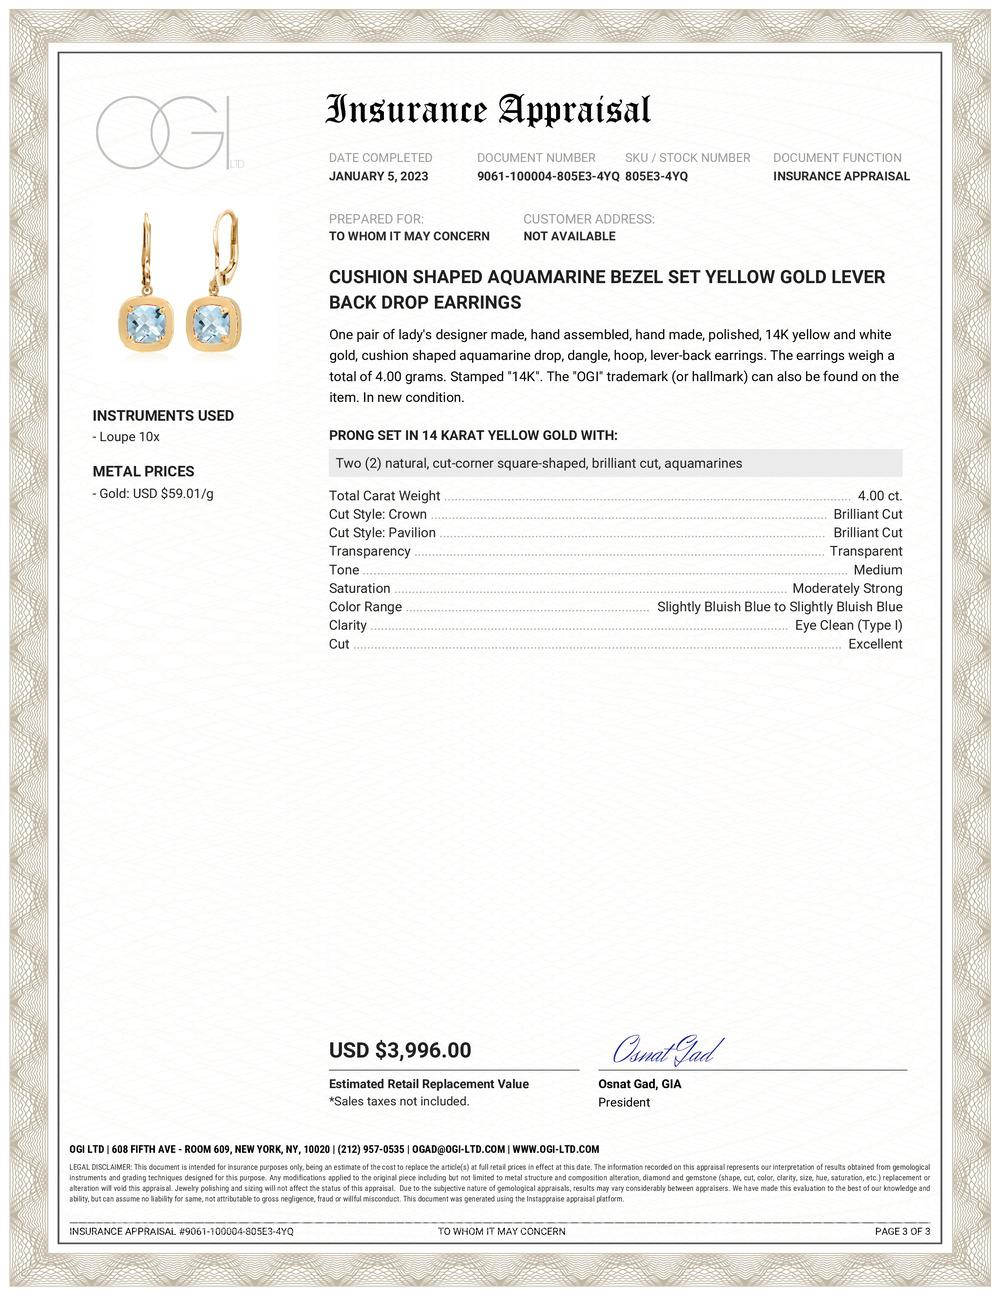 Introducing our stunning Cushion Shaped Aquamarine 4 Carat Bezel Set 14 Karat Yellow Gold 1.15 Inch Drop Earrings, the epitome of elegance and sophistication.
Gemstone: These exquisite earrings feature two cushion-cut aquamarine gemstones, each